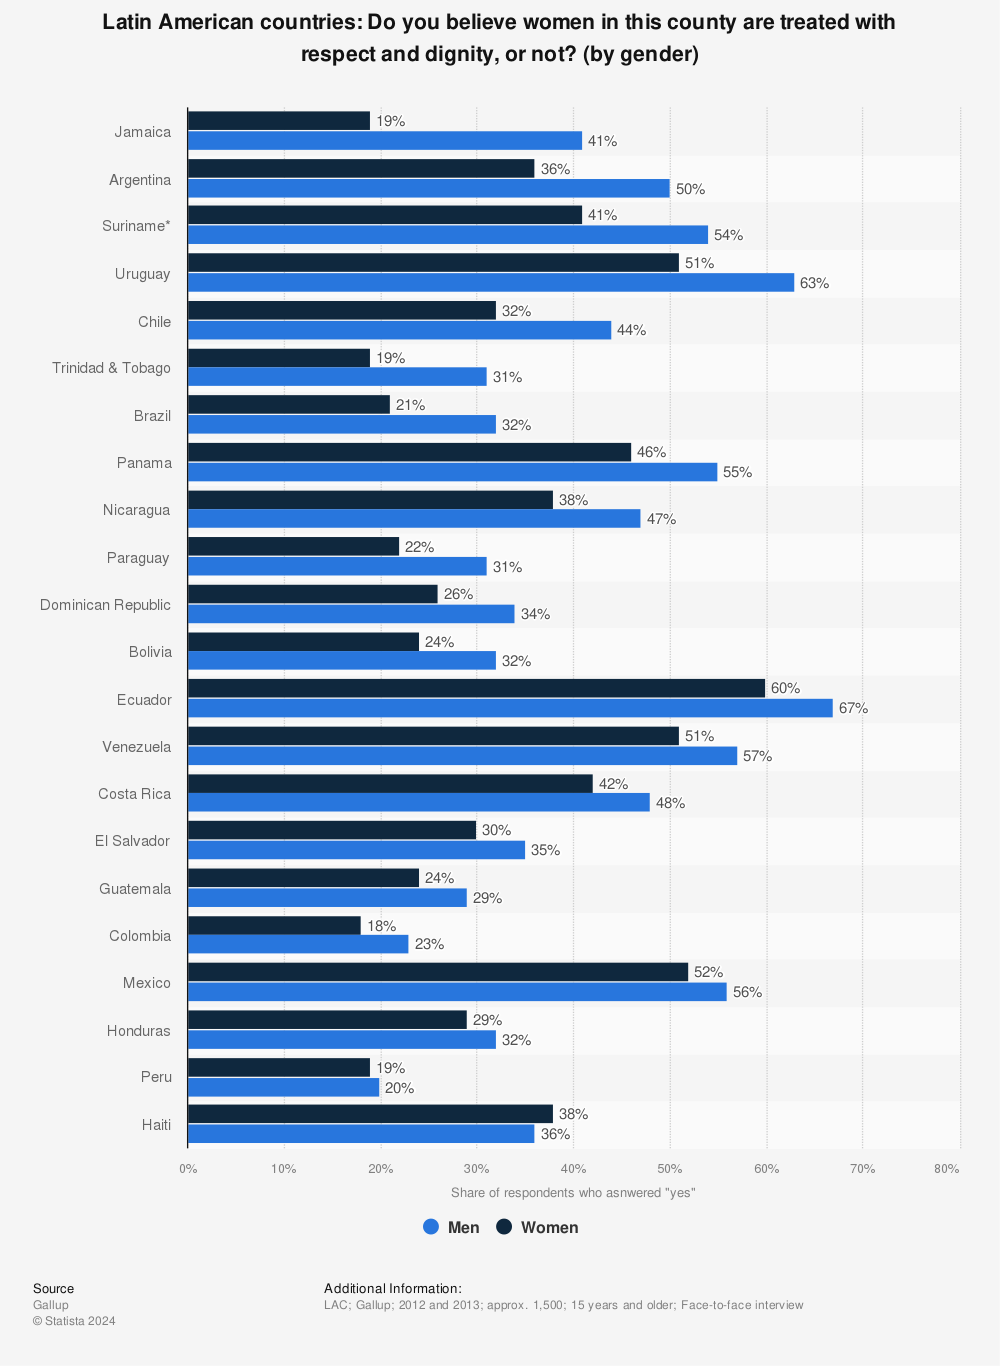 Statistic: Latin American countries: Do you believe women in this county are treated with respect and dignity, or not? (by gender) | Statista